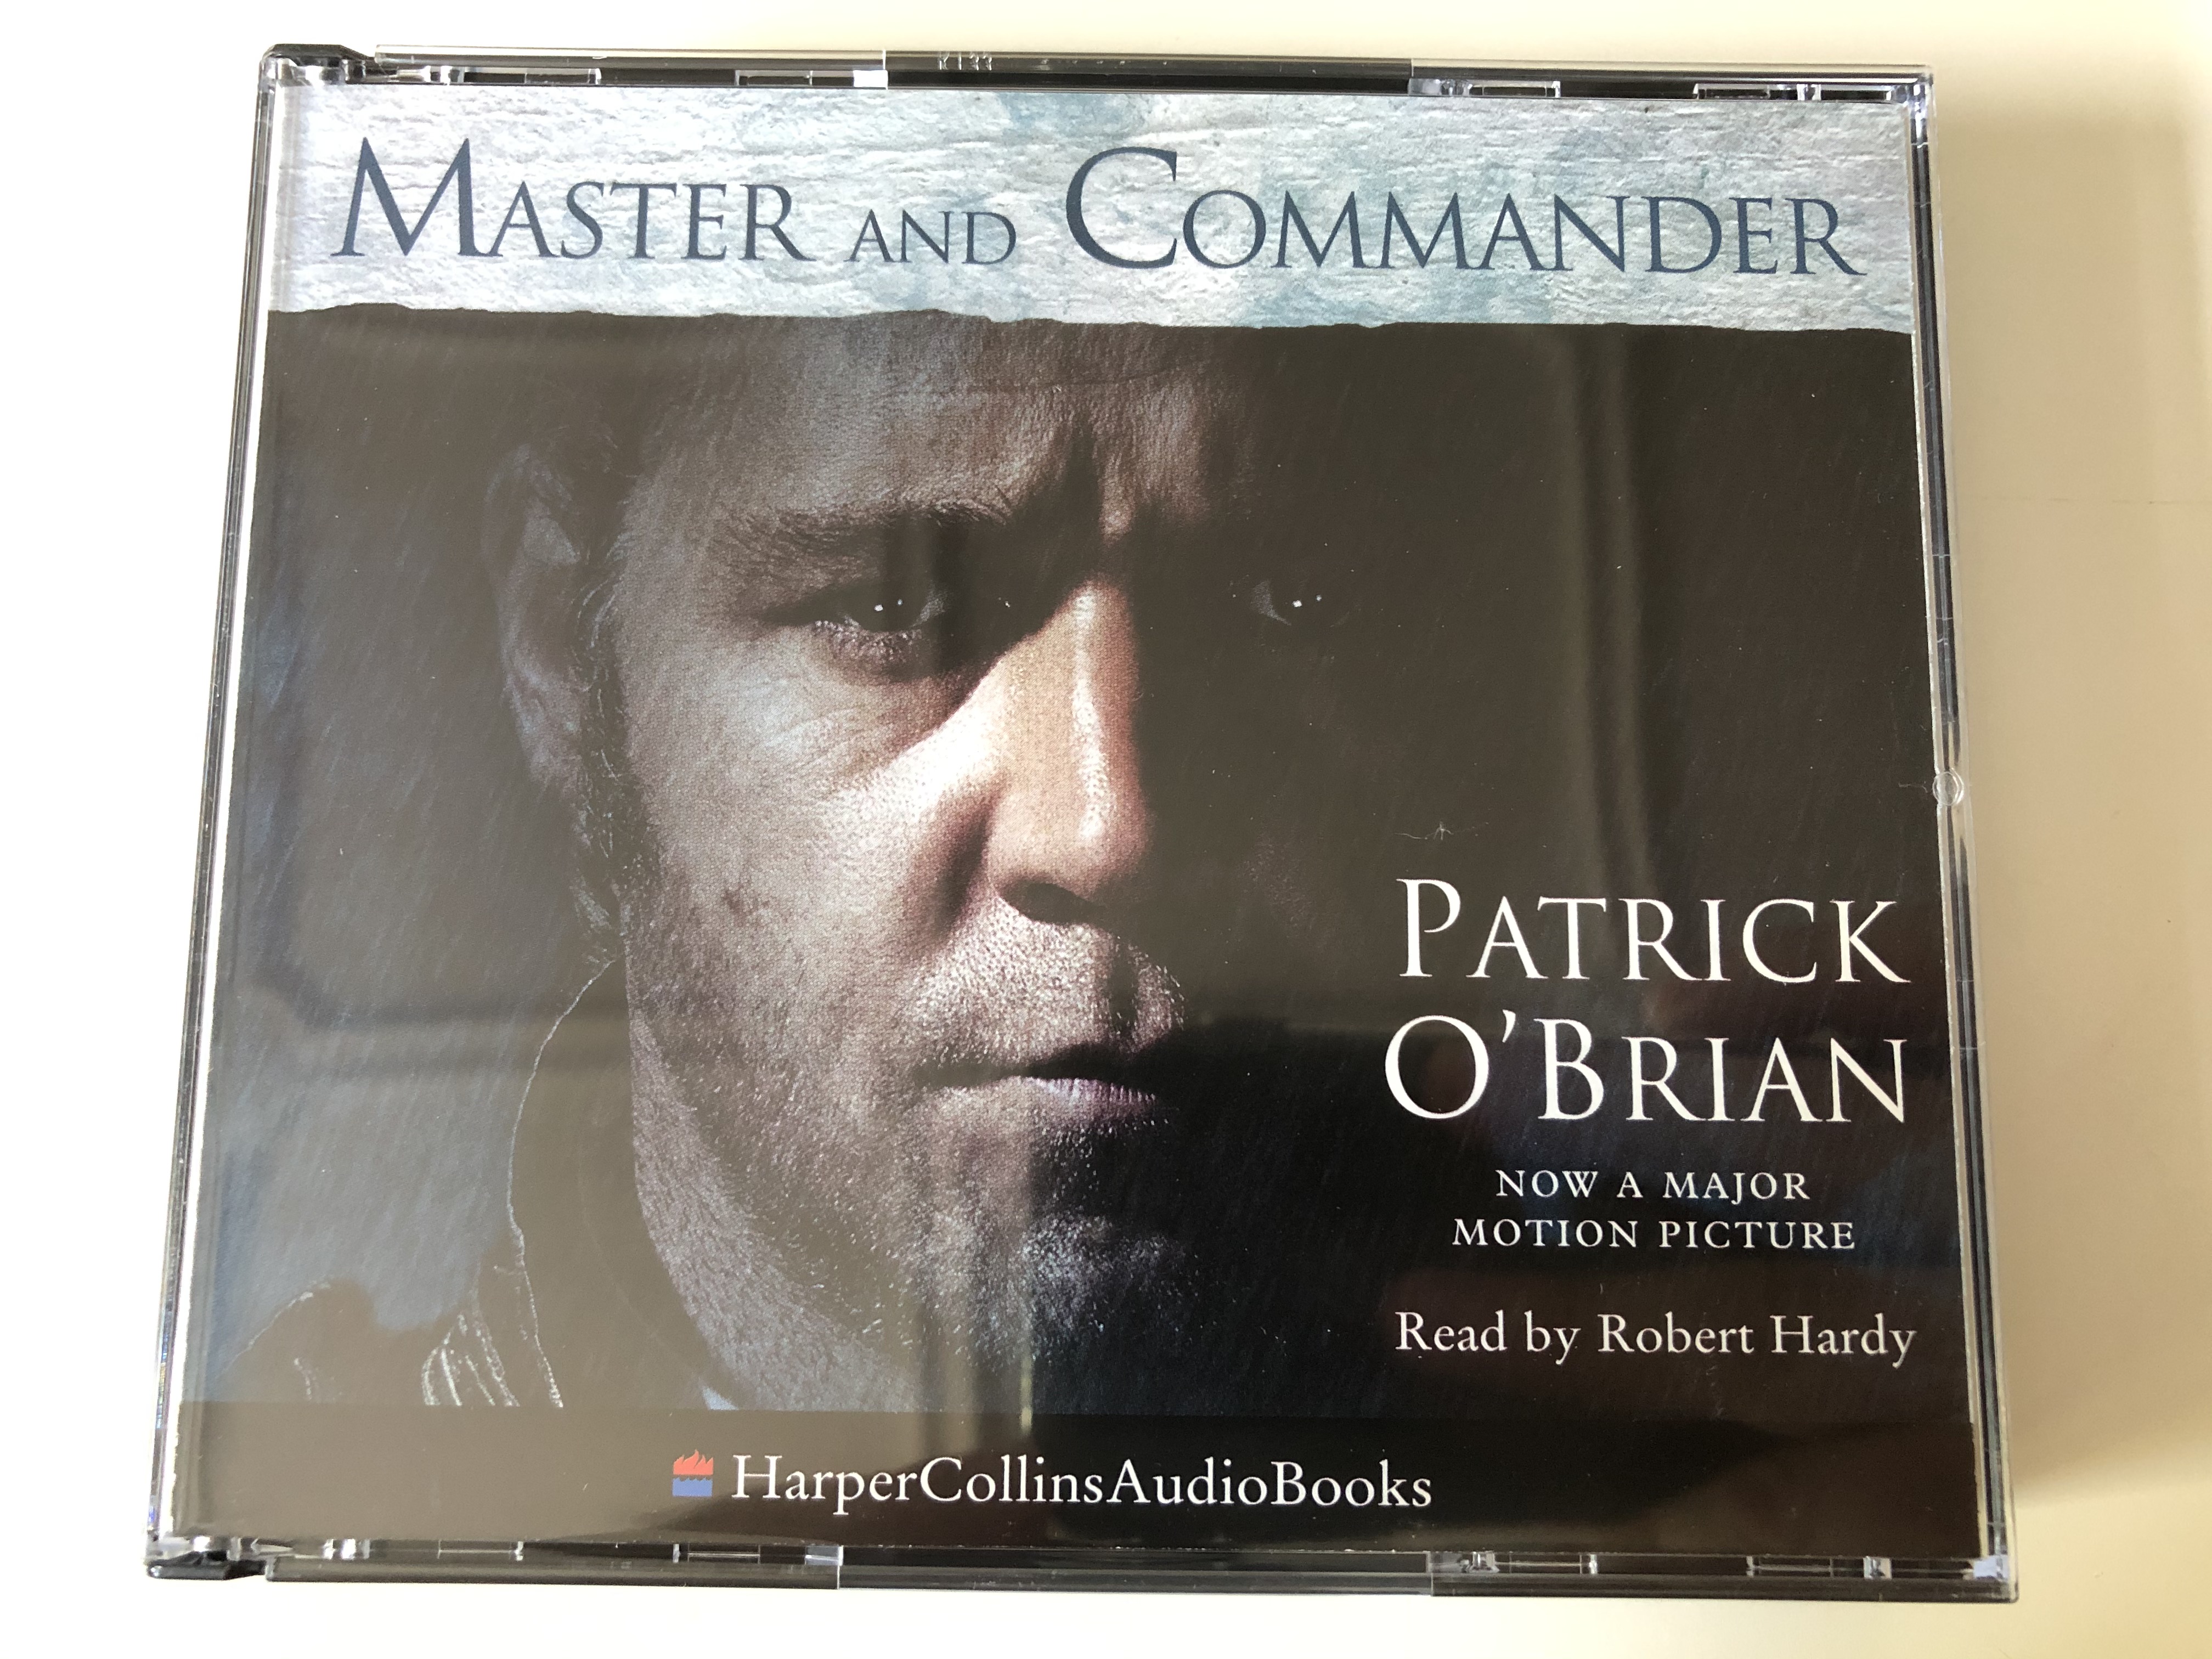 master-and-commander-patrick-o-brian-now-a-major-motion-picture-read-by-robert-hardy-harpercollinsaudiobooks-harper-collins-4x-audio-cd-1995-hccd-979-1-.jpg